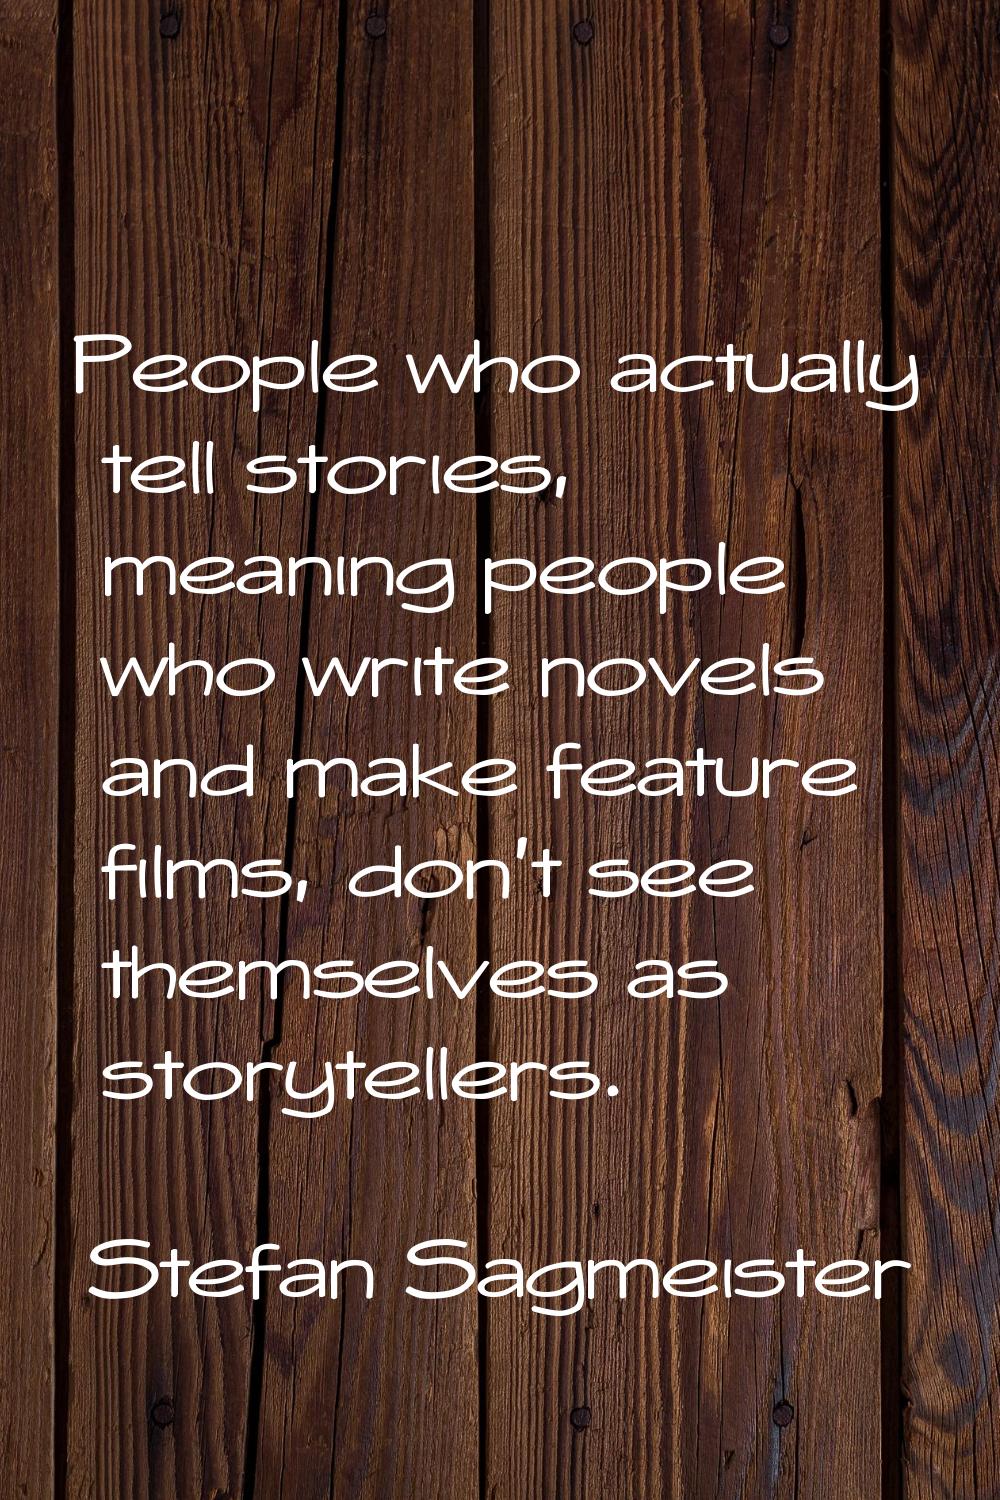 People who actually tell stories, meaning people who write novels and make feature films, don't see